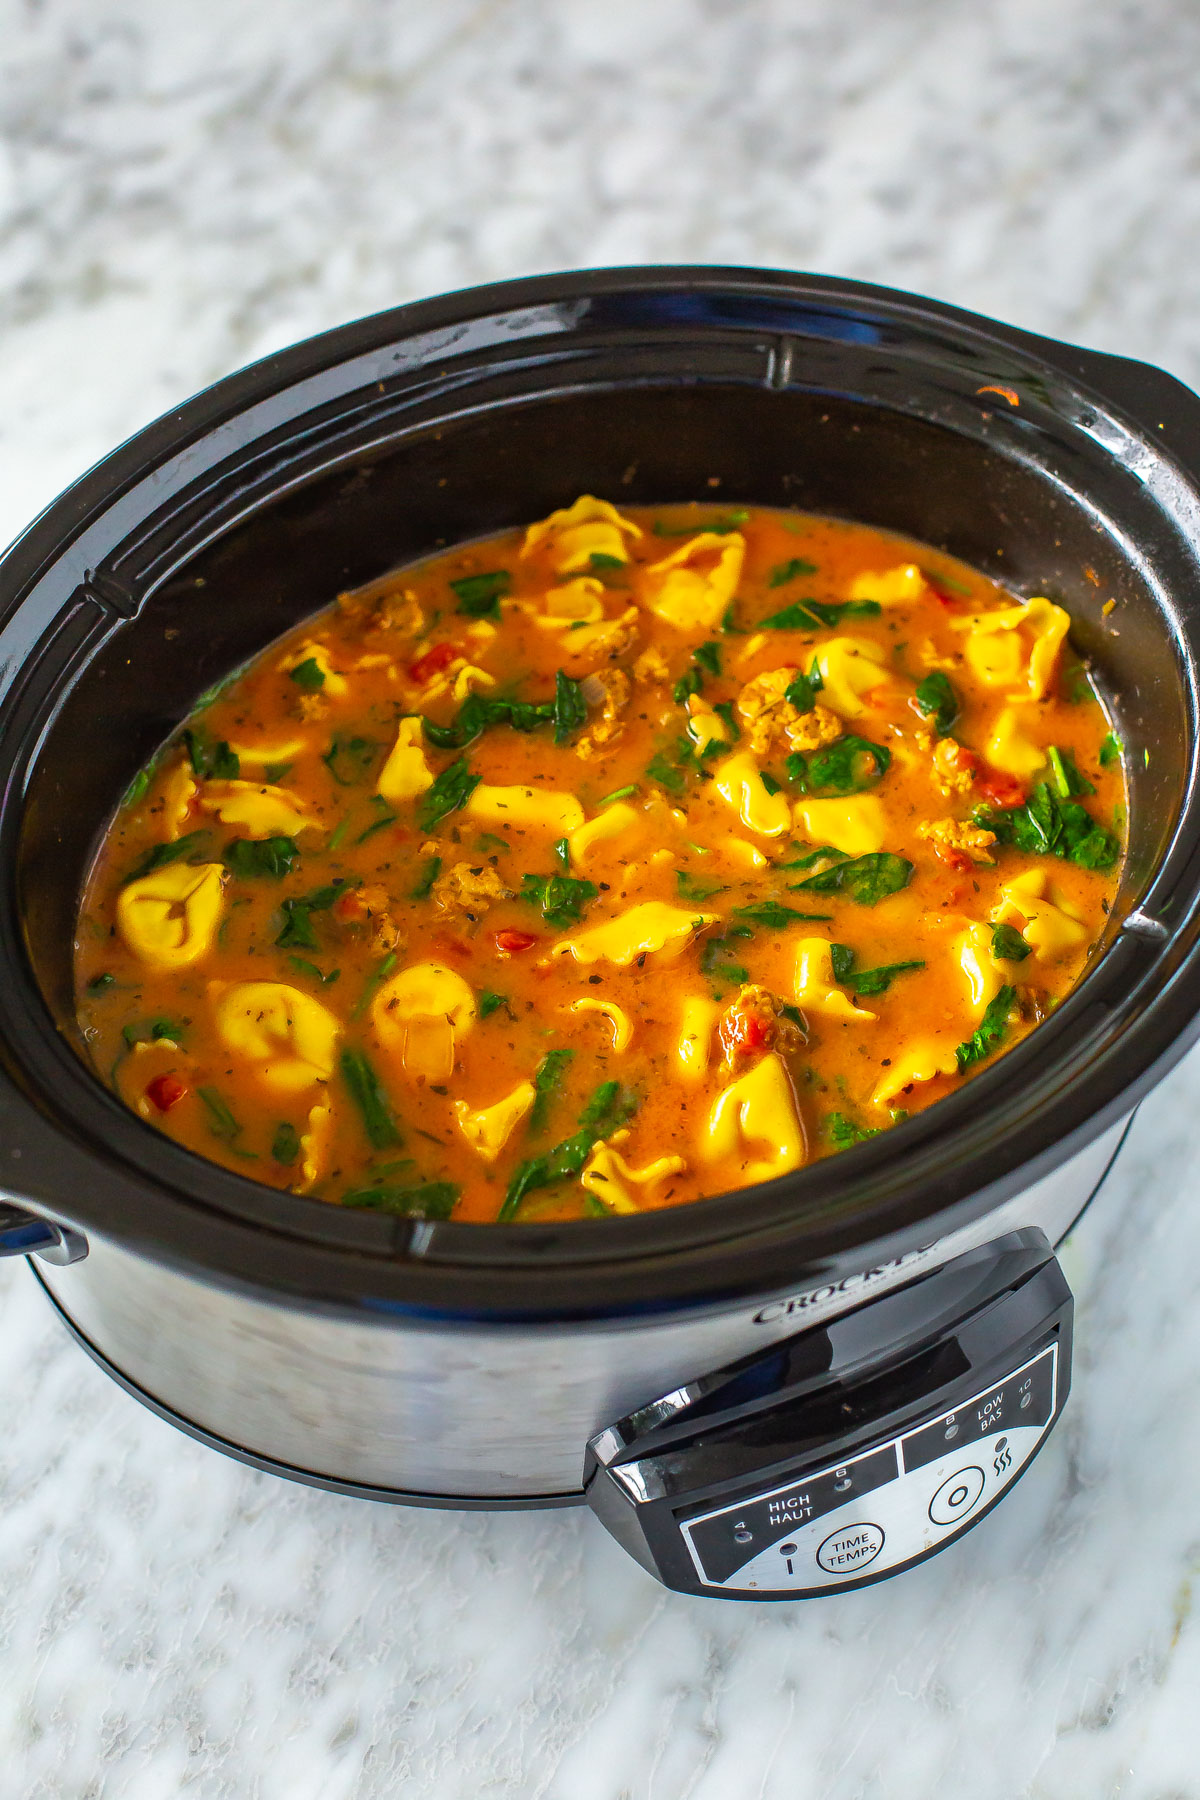 A slow cooker filled with crockpot tortellini soup/